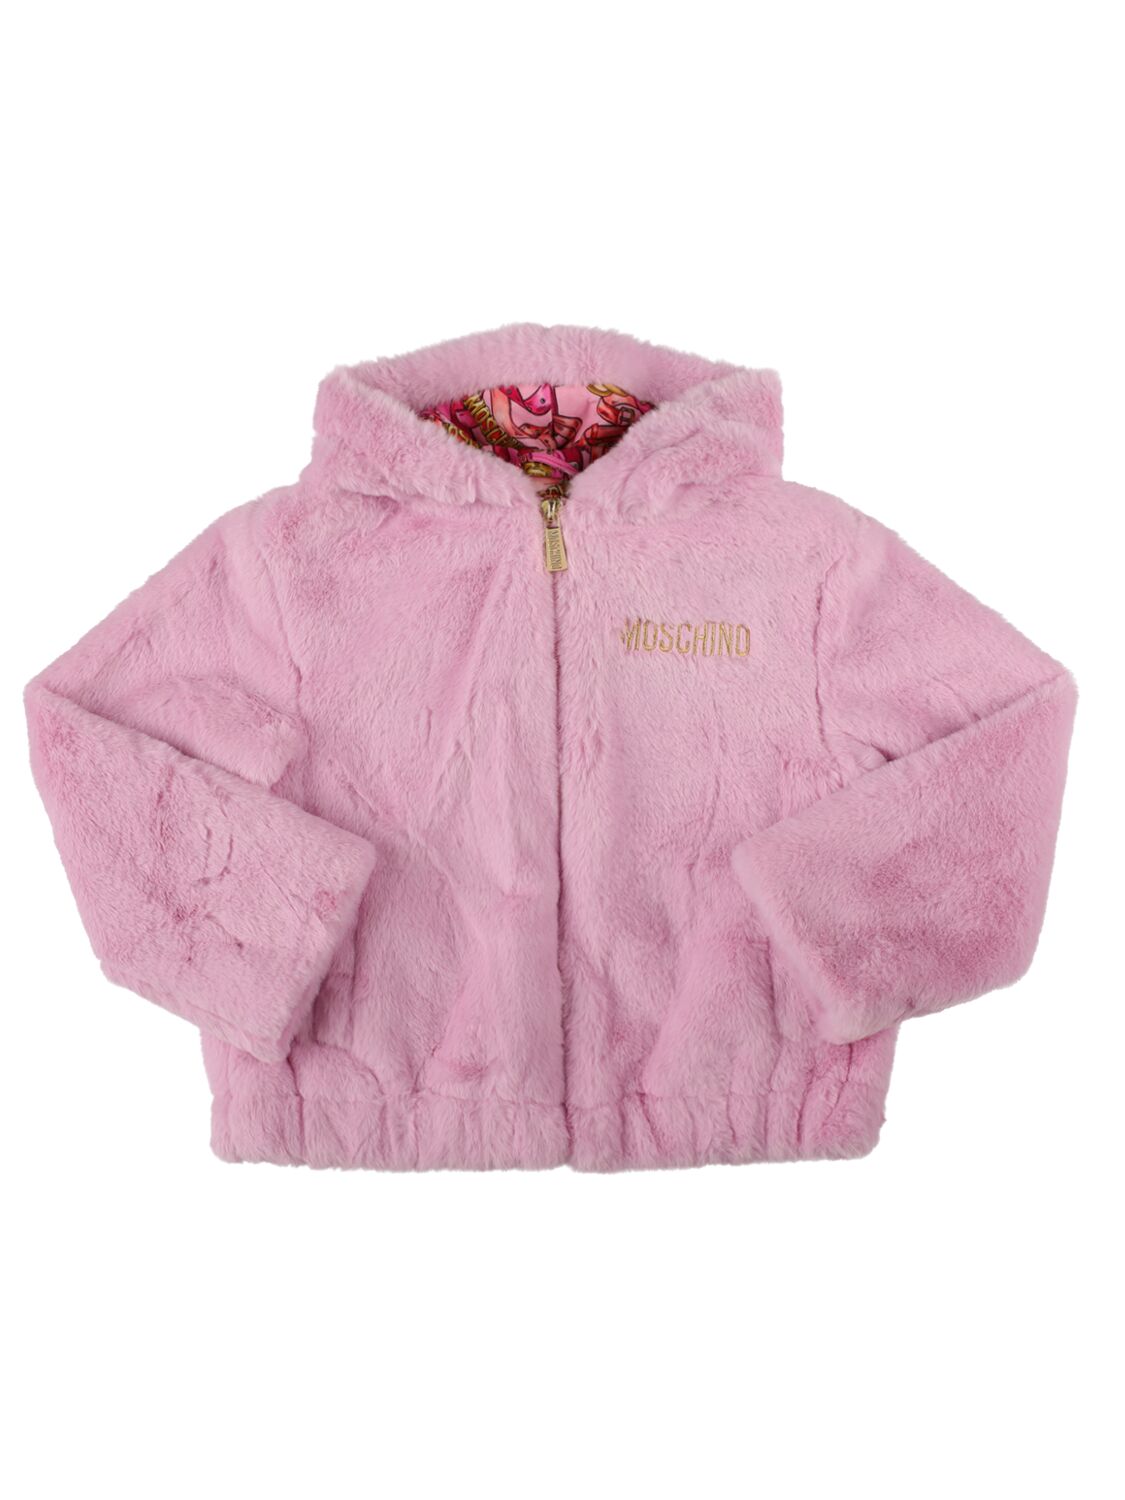 Moschino Kids' Faux Fur Jacket In Pink